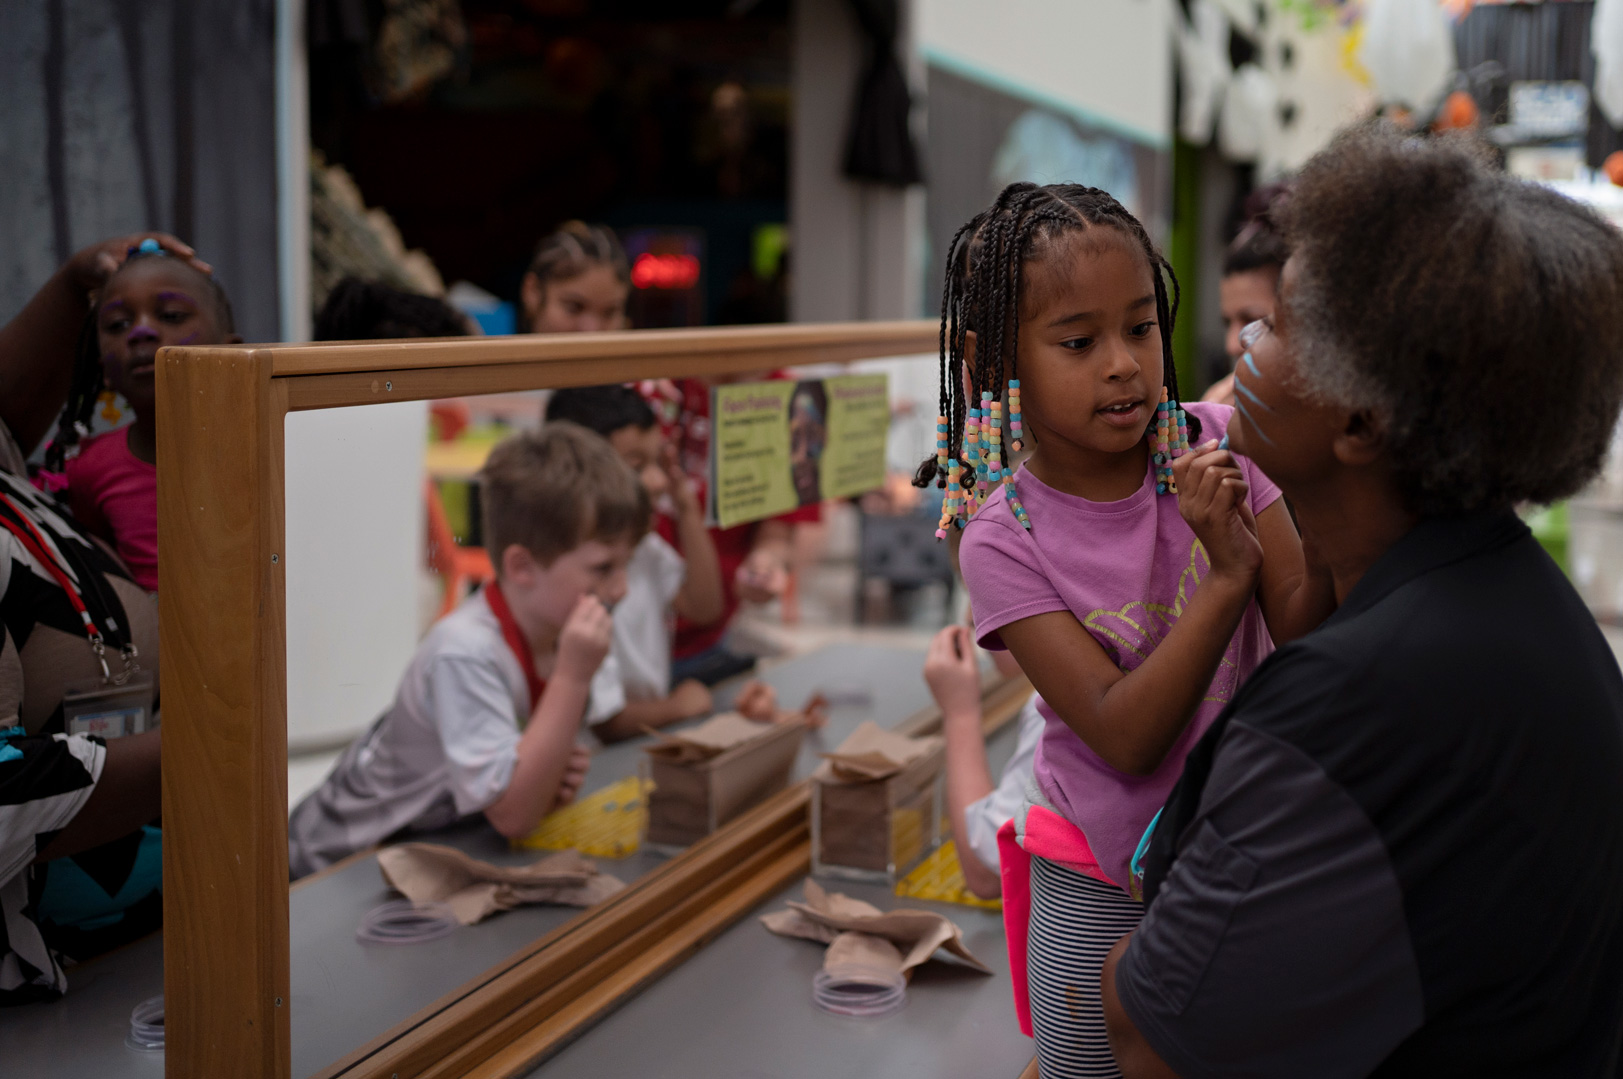 Jackie Wallace, right, gets her face painted by her granddaughter during the Indigenous People's Day commemoration at the Children’s Museum Houston